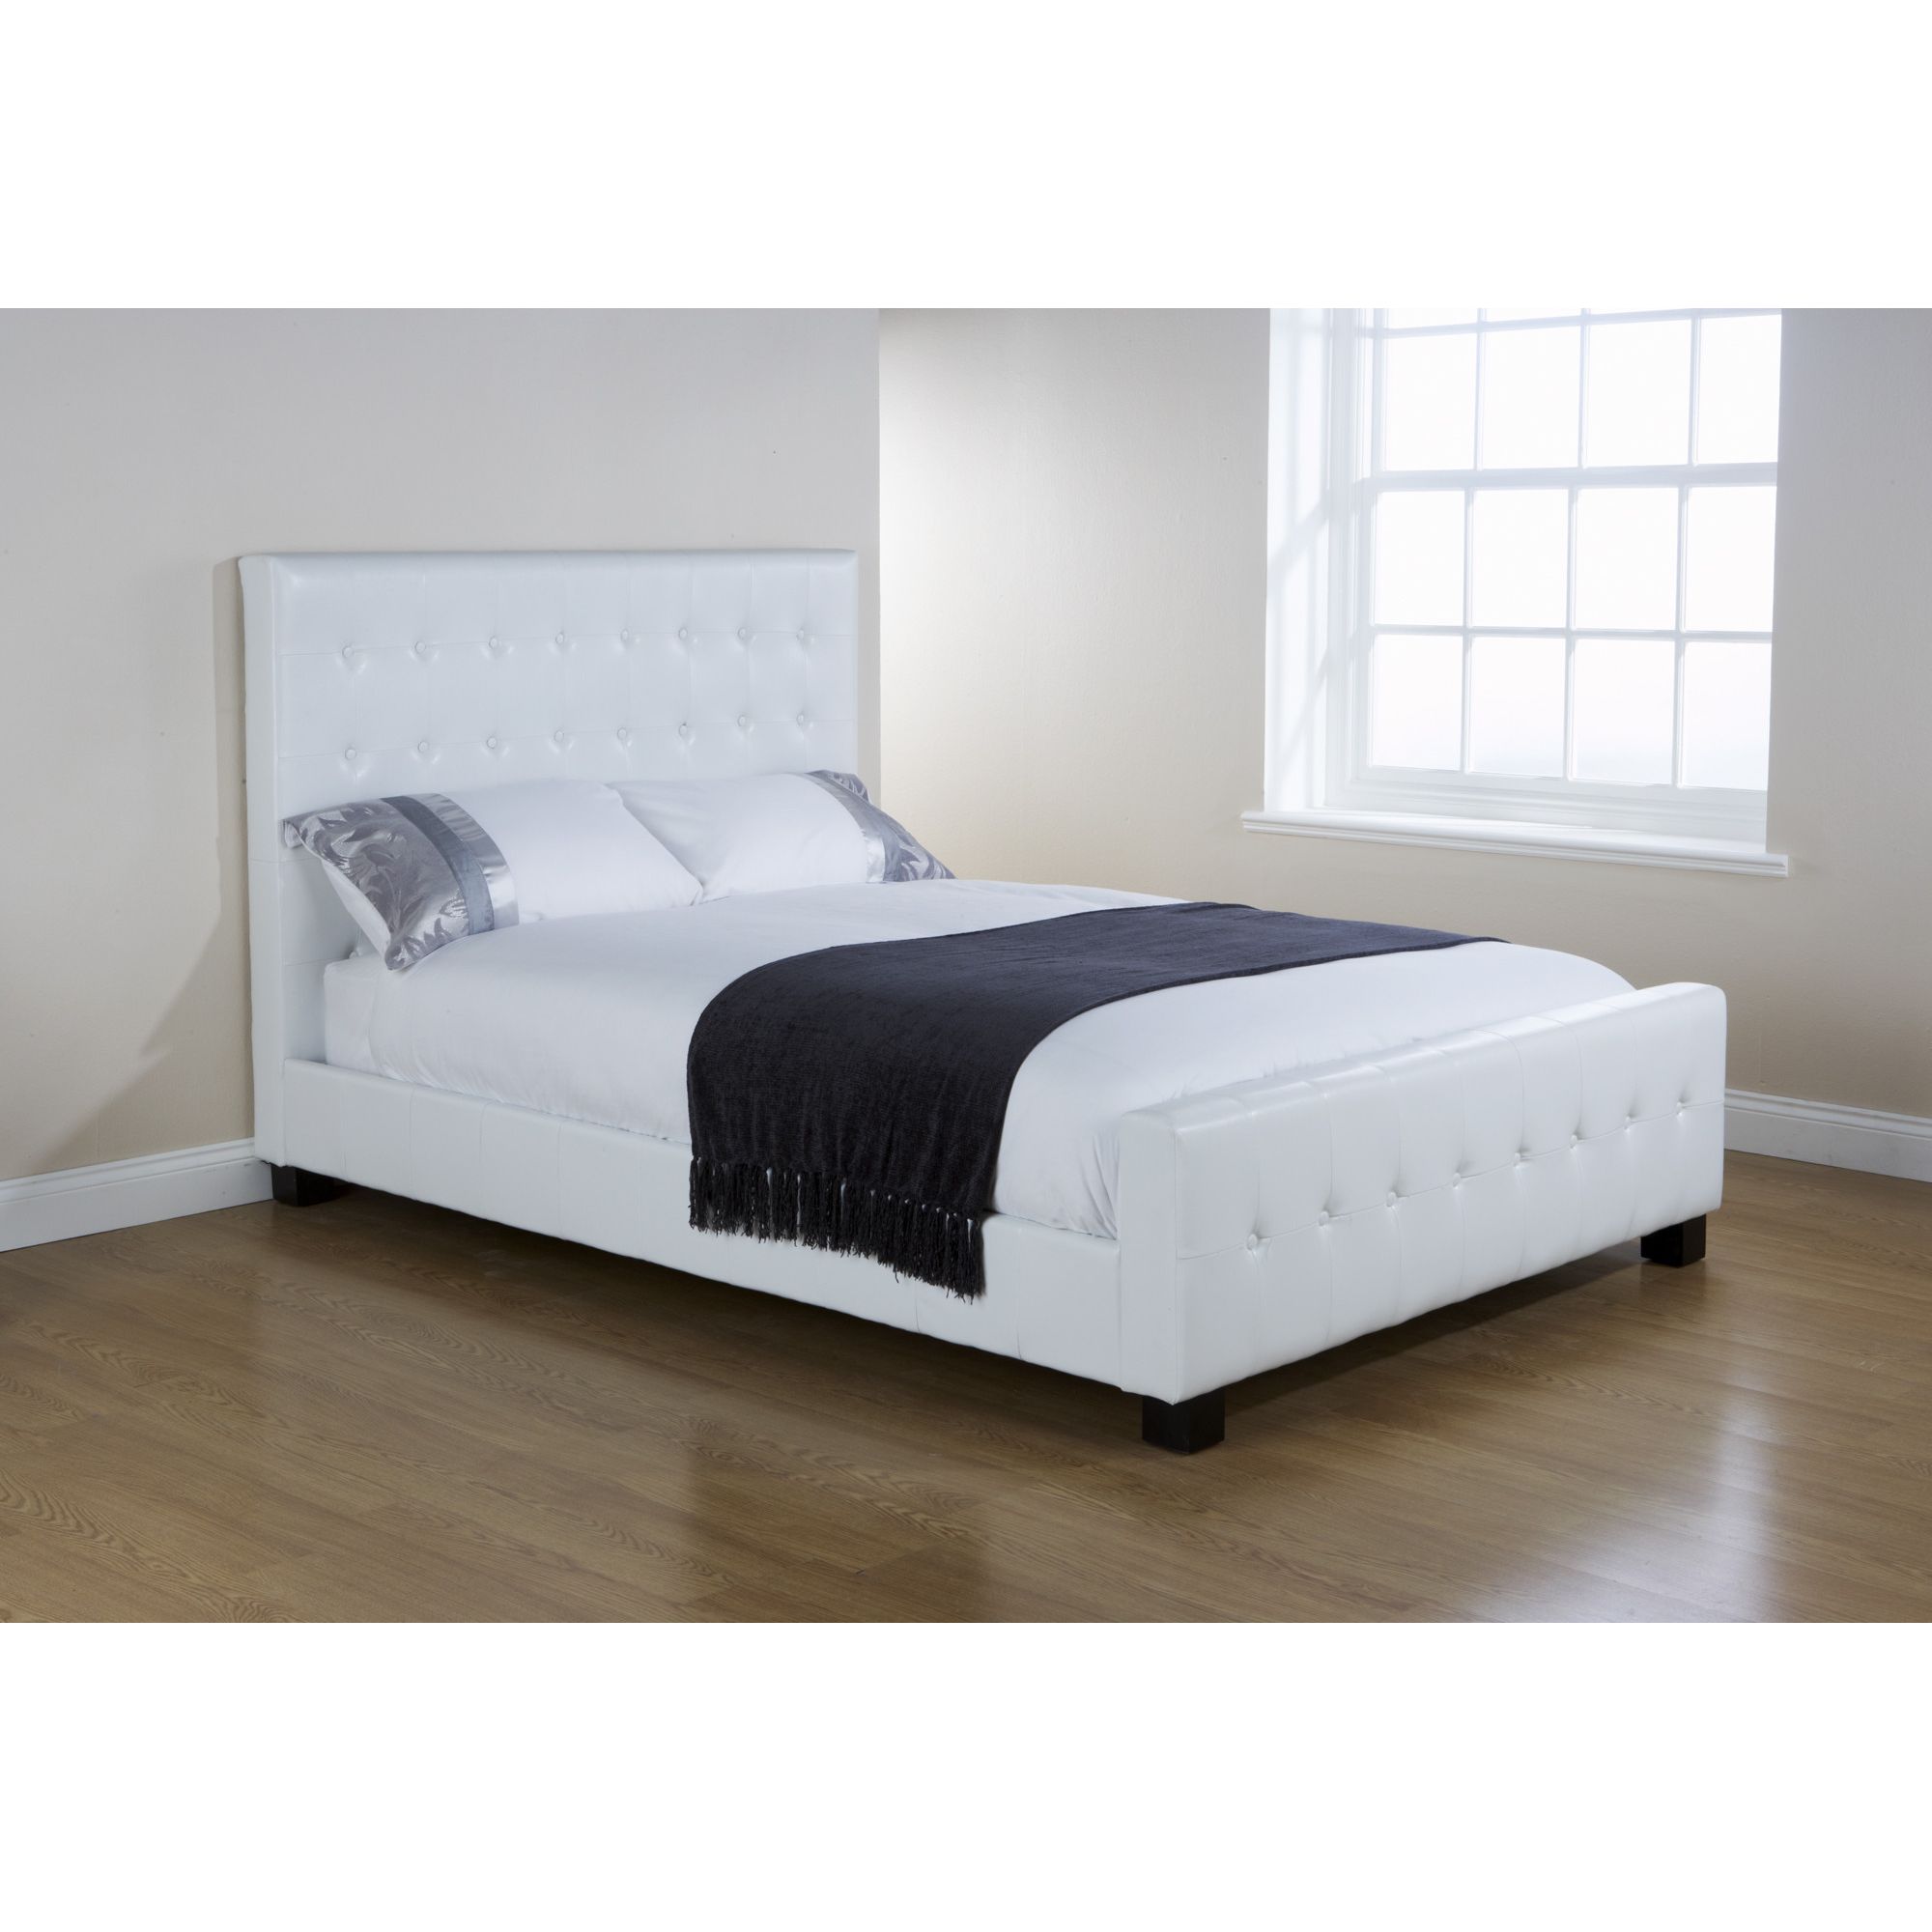 Elements Mayfair Button Bed - Double - White at Tesco Direct